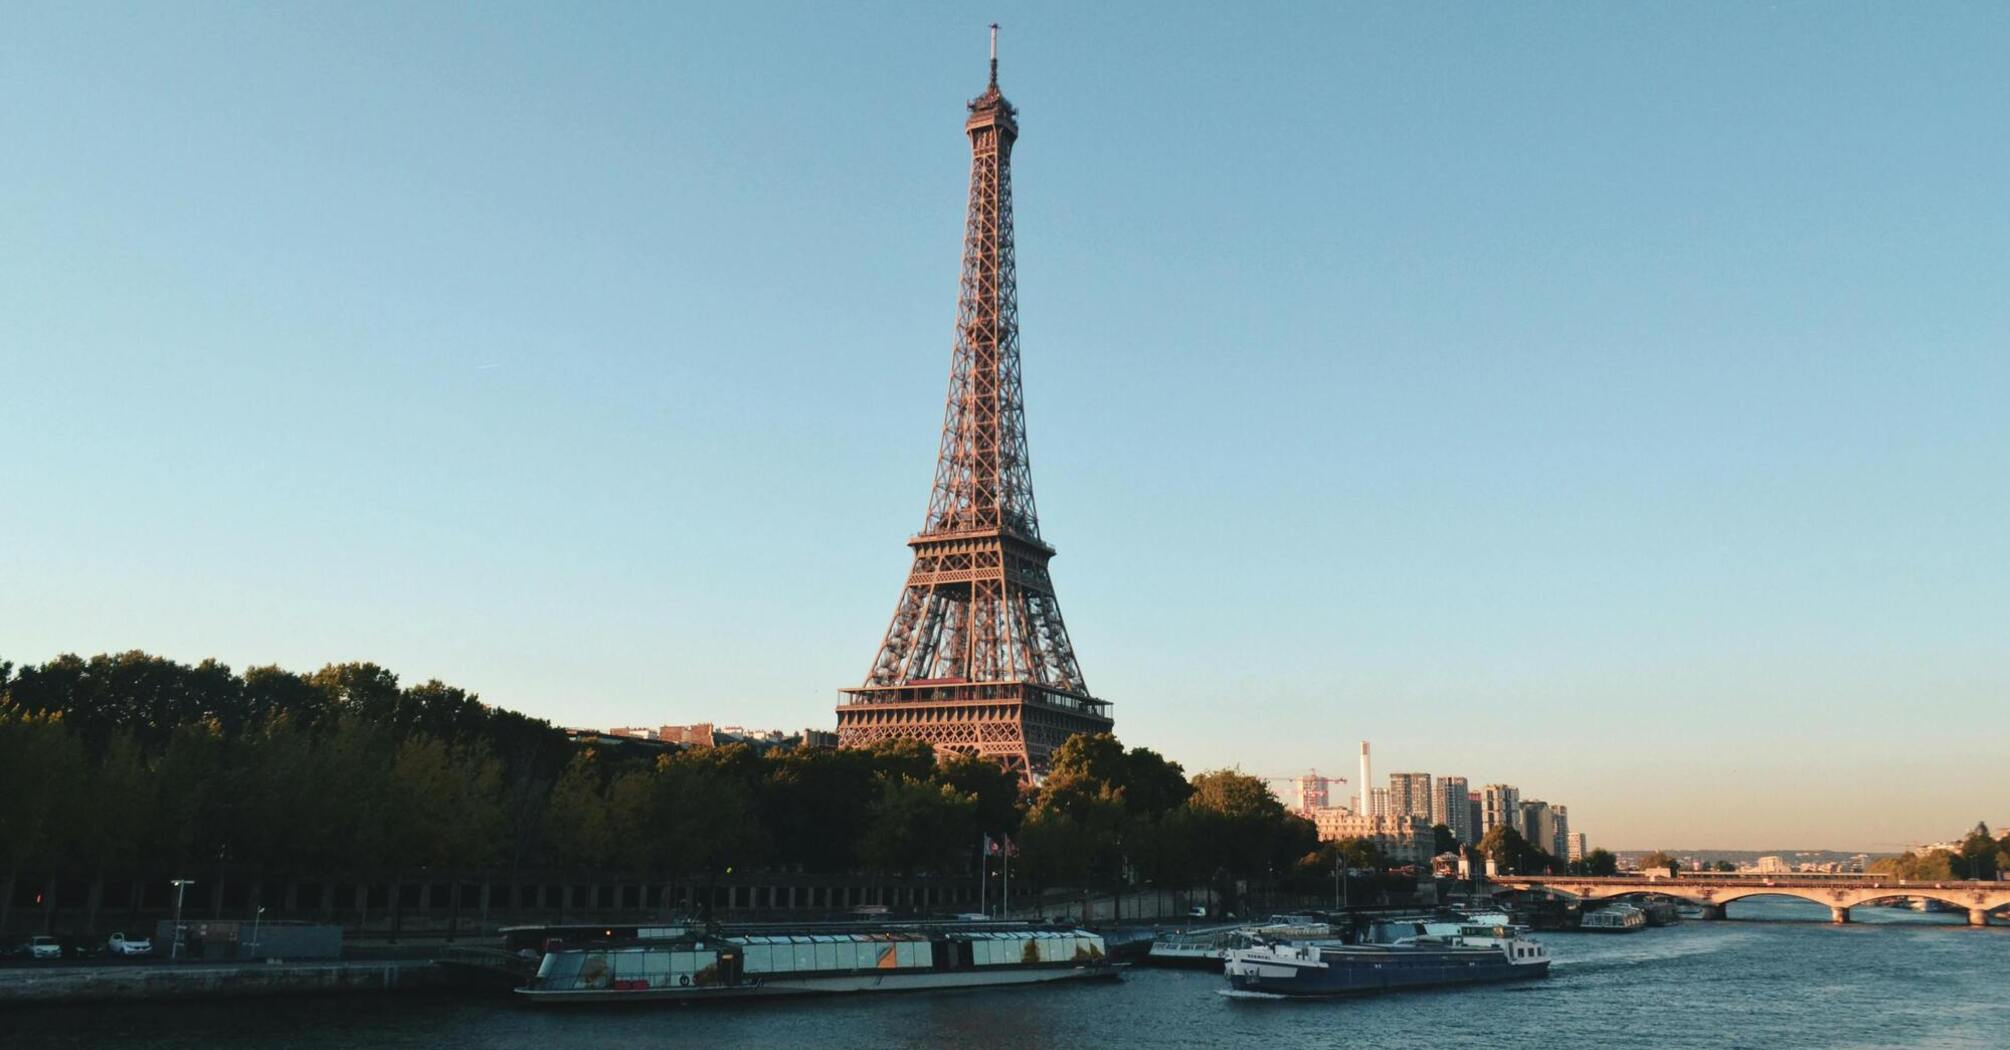 The Eiffel Tower reopened after a 6-day strike